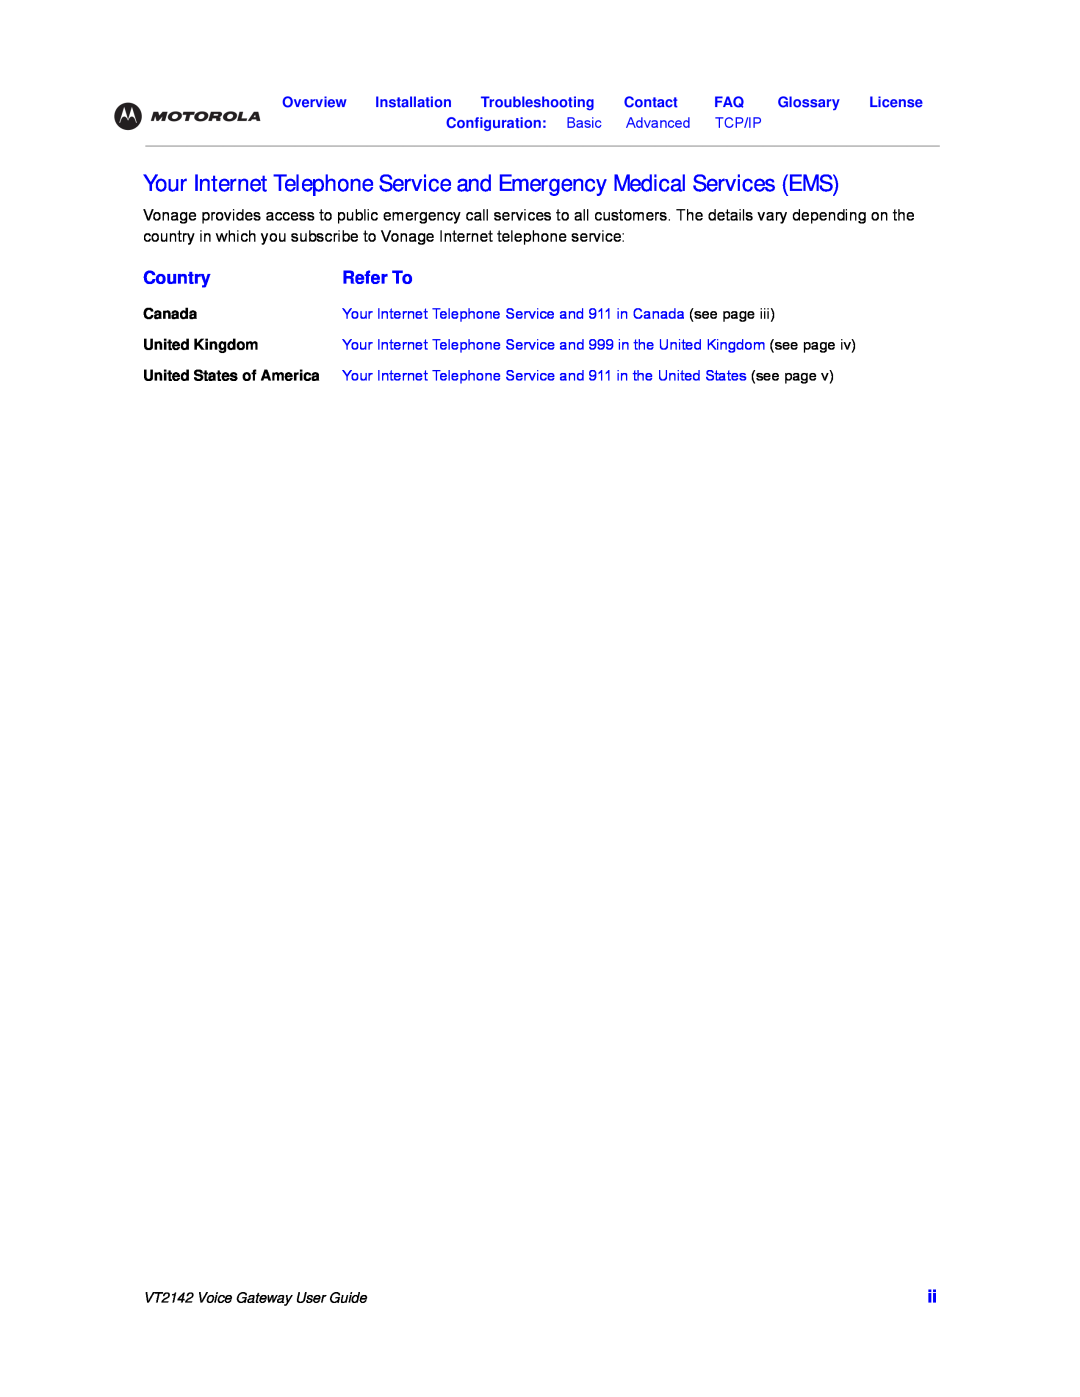 Motorola VT2142 manual Your Internet Telephone Service and Emergency Medical Services EMS, Country, Refer To 